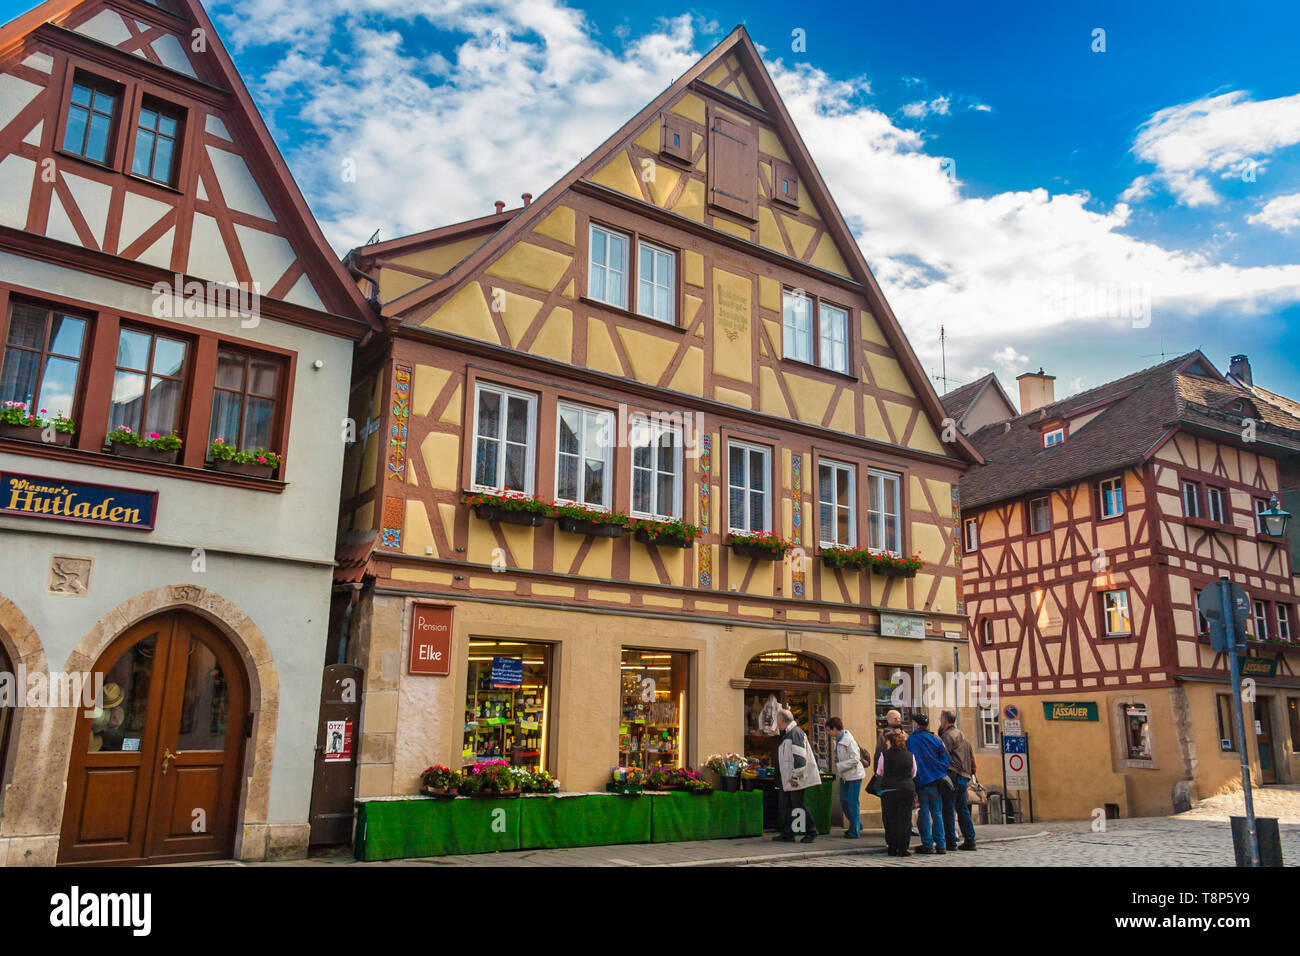 Picturesque view of a row of colourful half-timbered houses and shops with people in front on a cobblestone street in the medieval town Rothenburg ob... Stock Photo